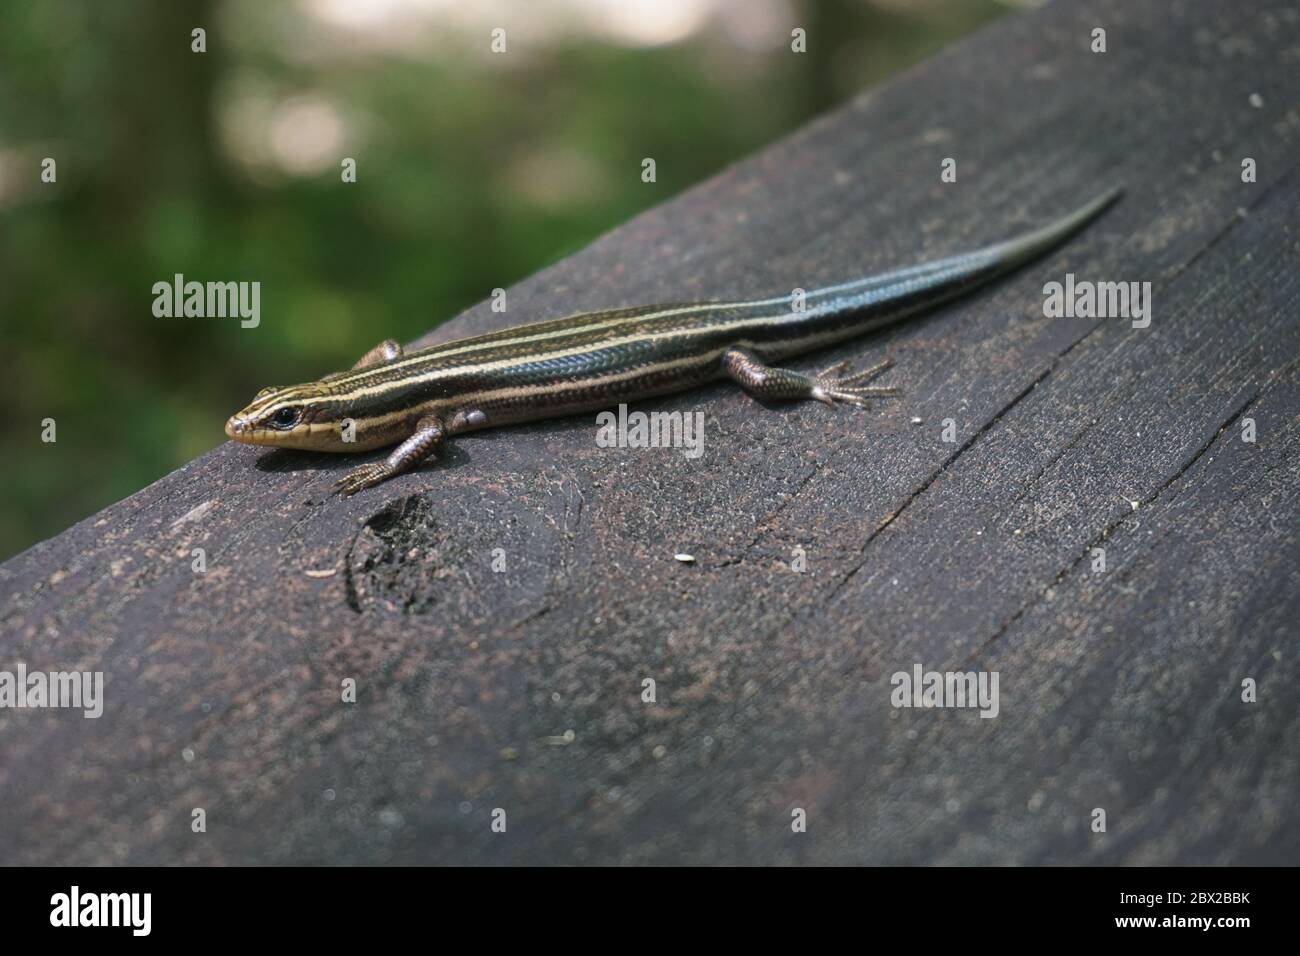 Blue Tail Lizard, five line lizard, found on a piece of wood in the Everglades, Florida. Stock Photo